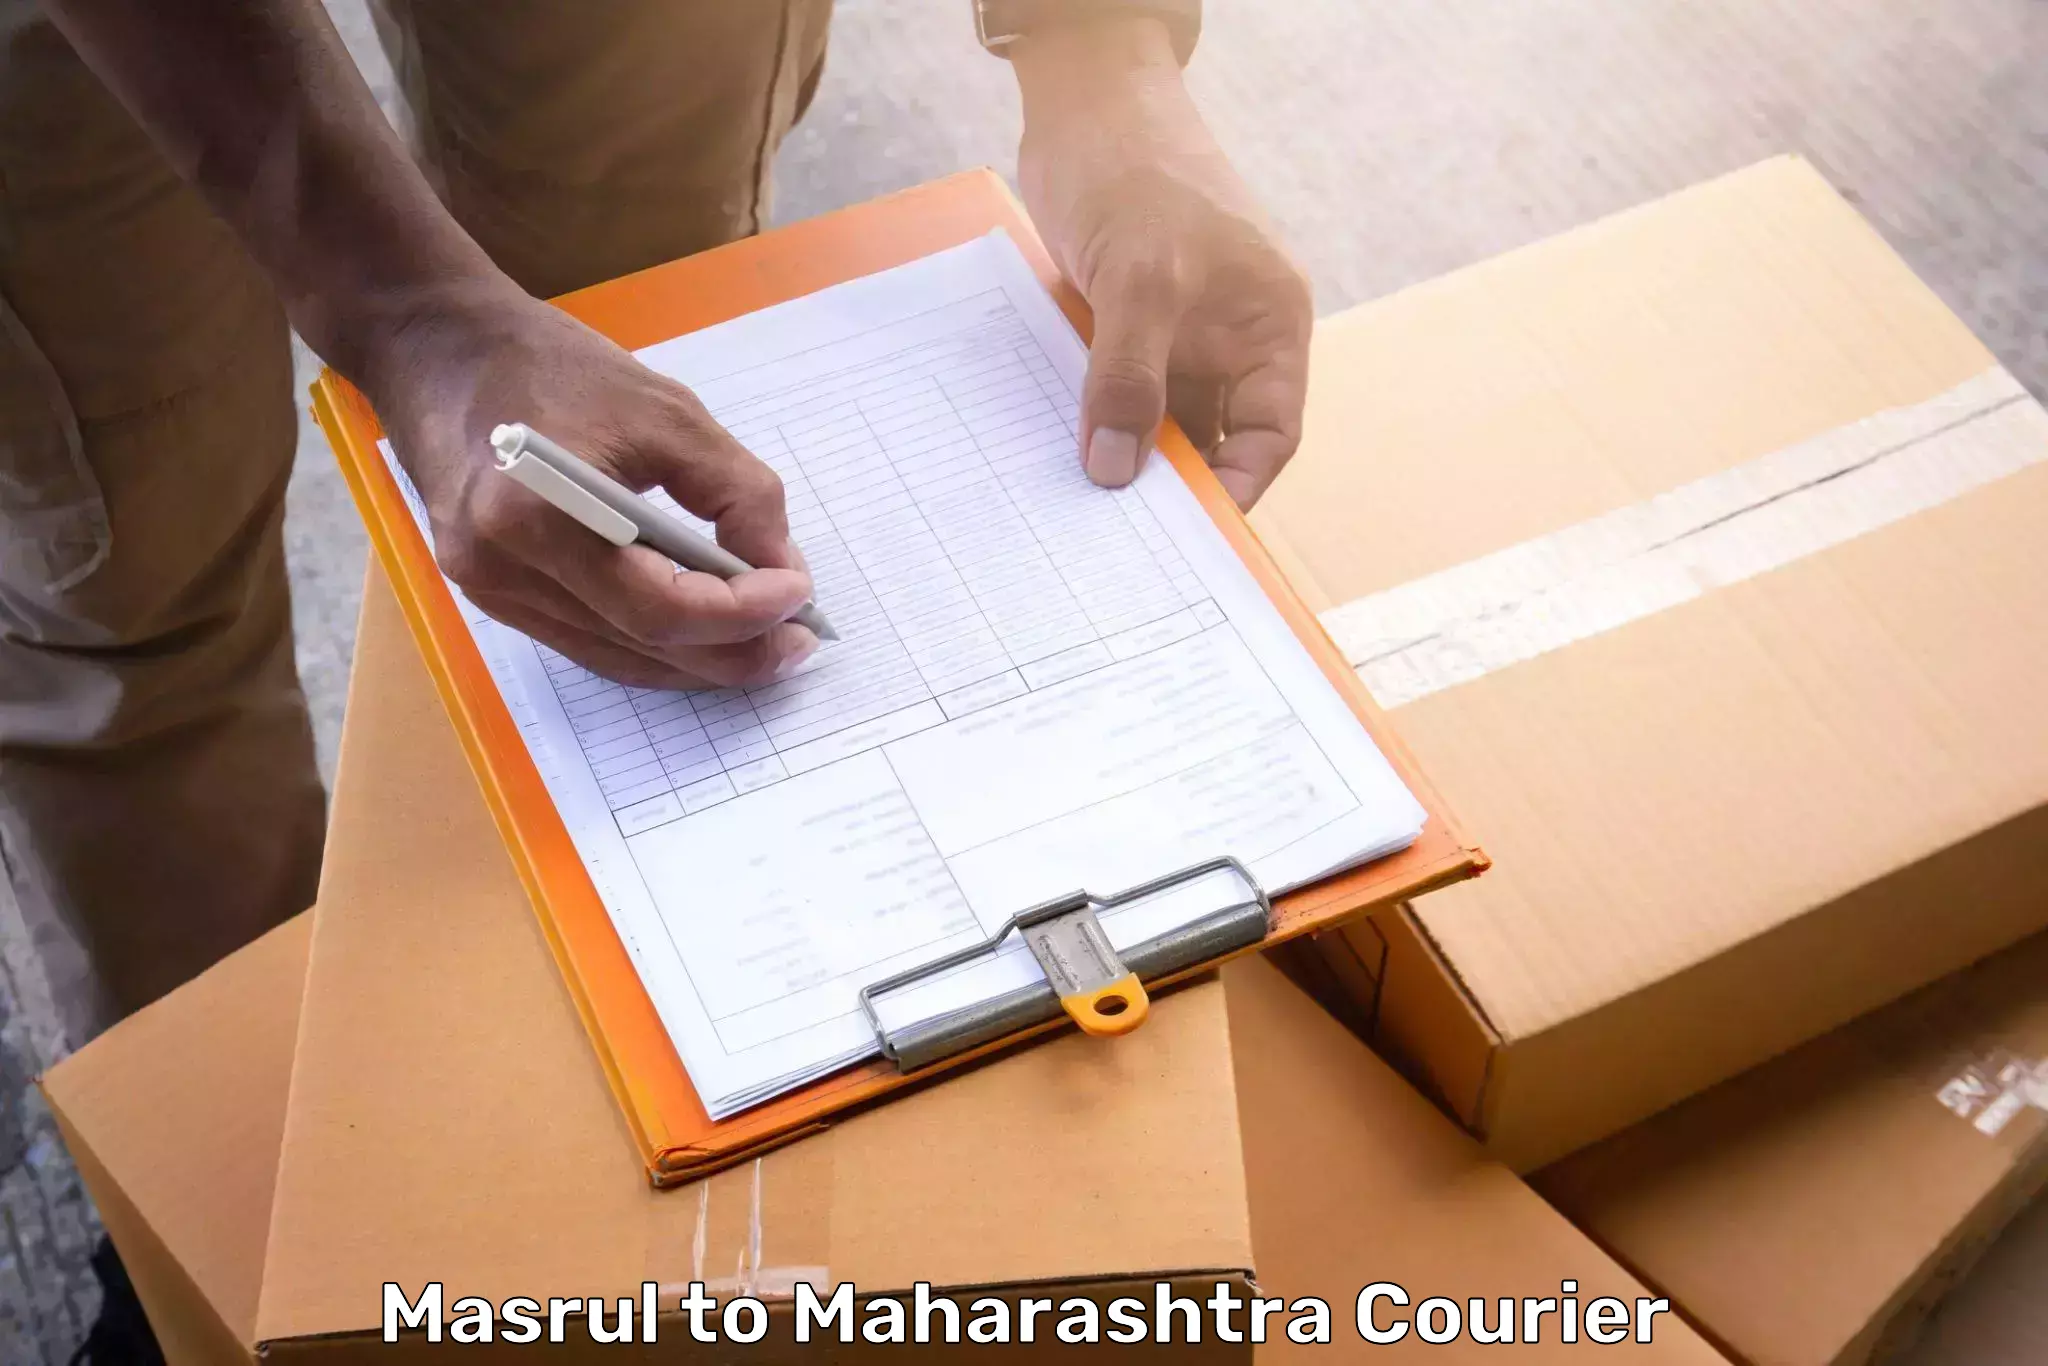 Instant baggage transport quote Masrul to Wardha